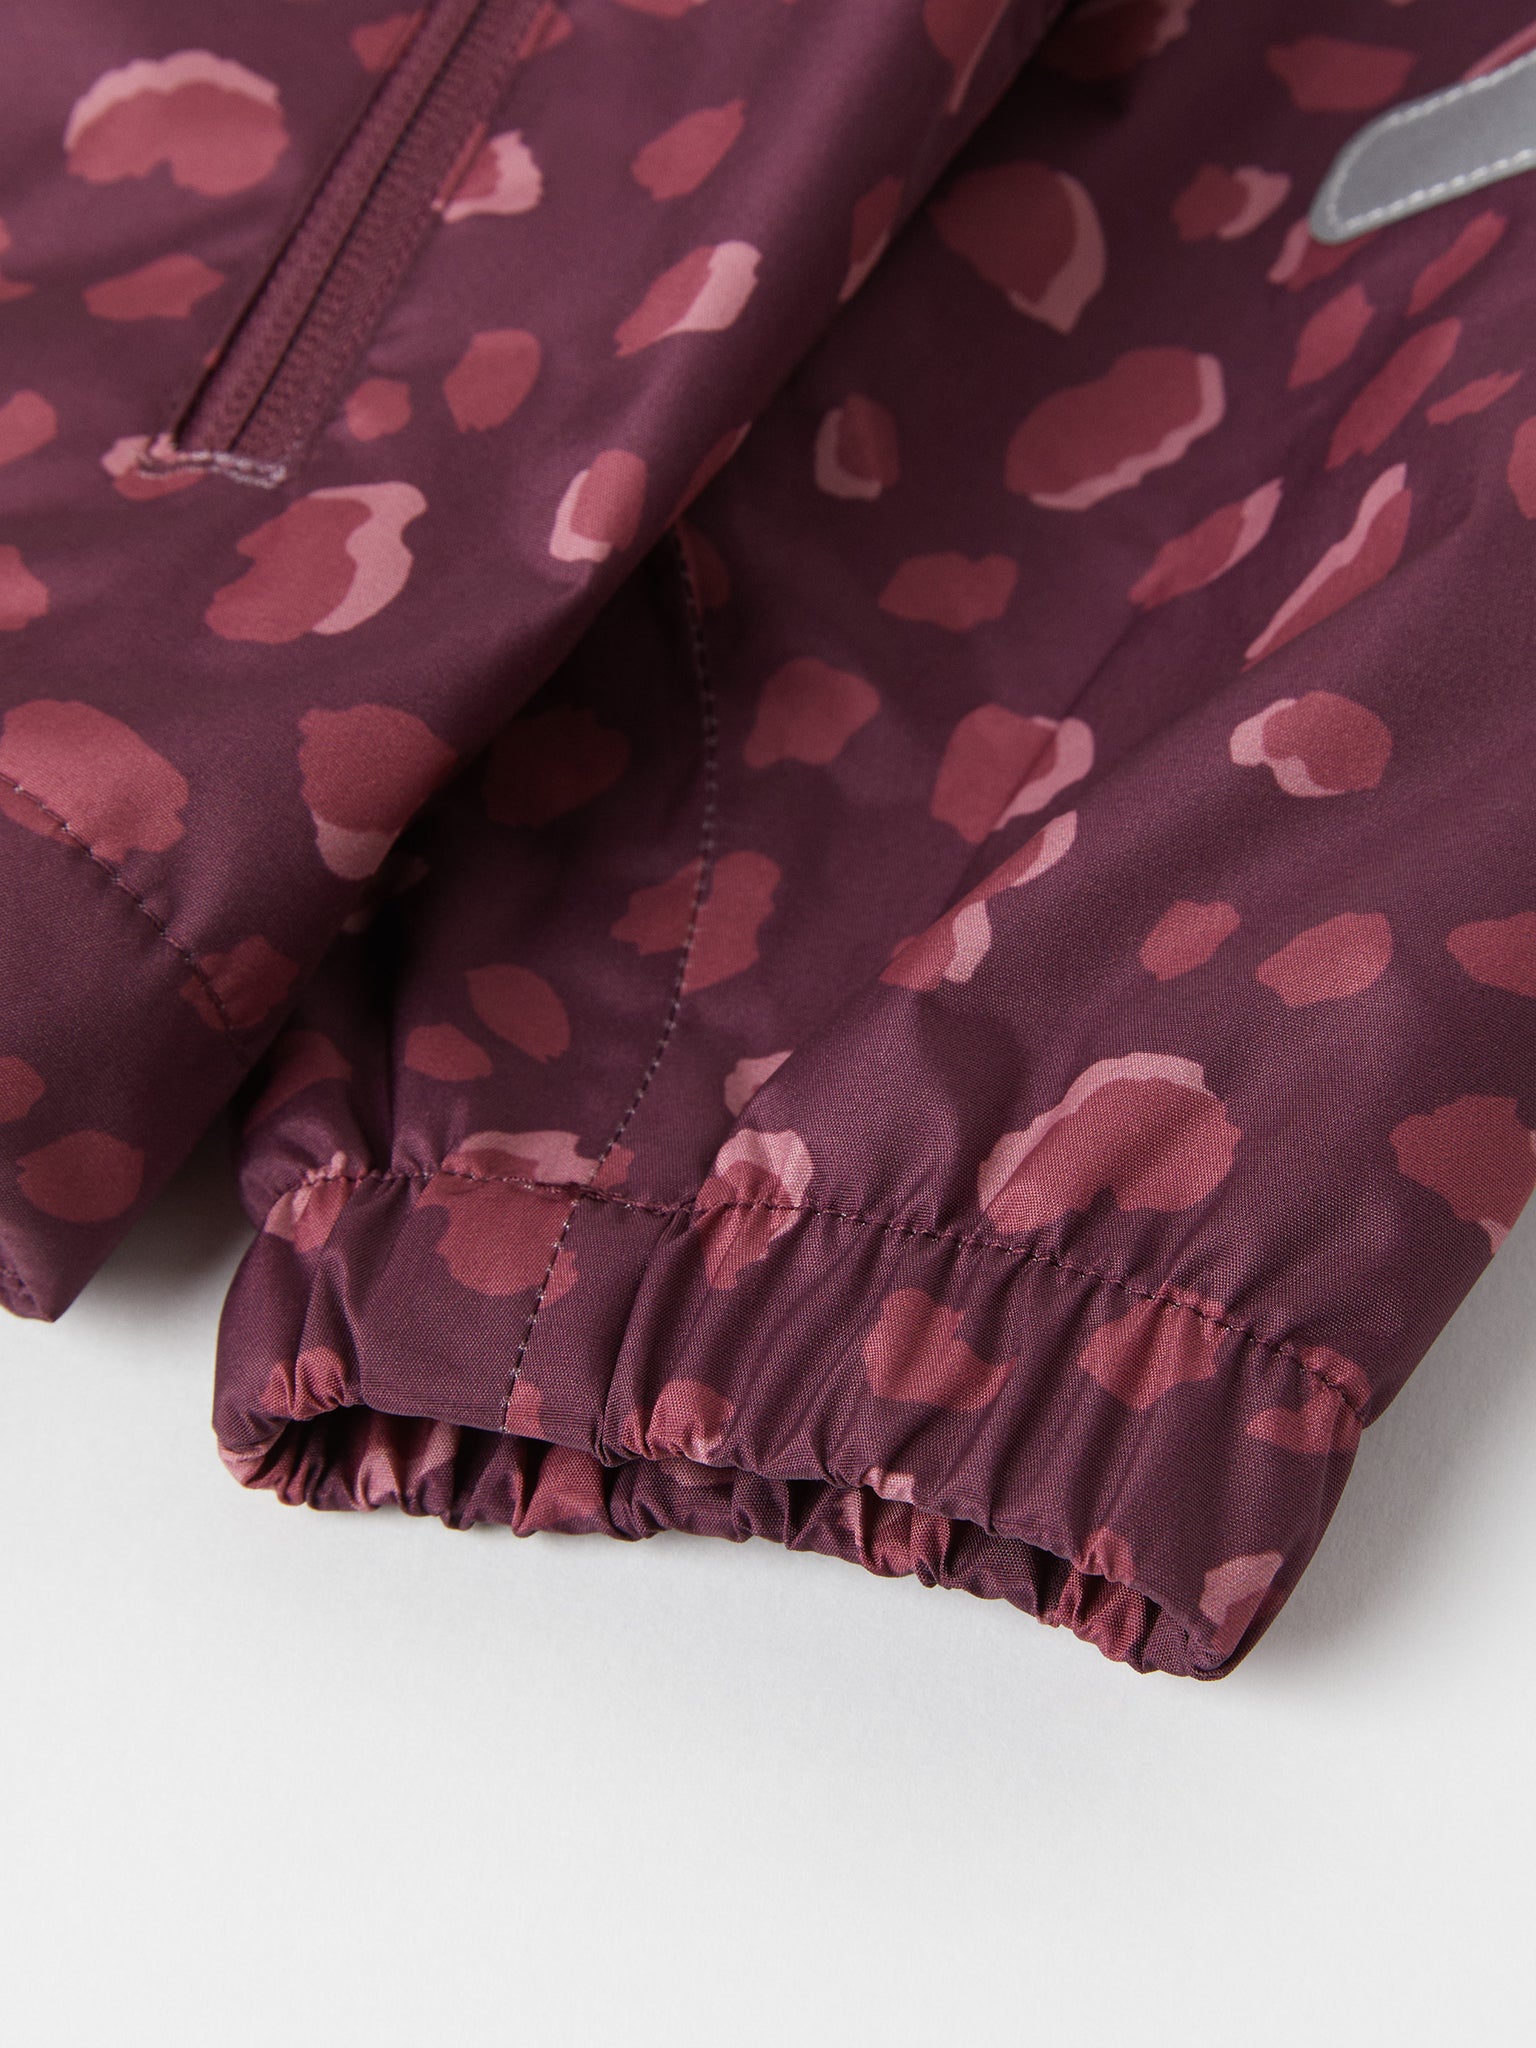 Burgundy Kids Waterproof Shell Jacket from the Polarn O. Pyret outerwear collection. Quality kids clothing made to last.